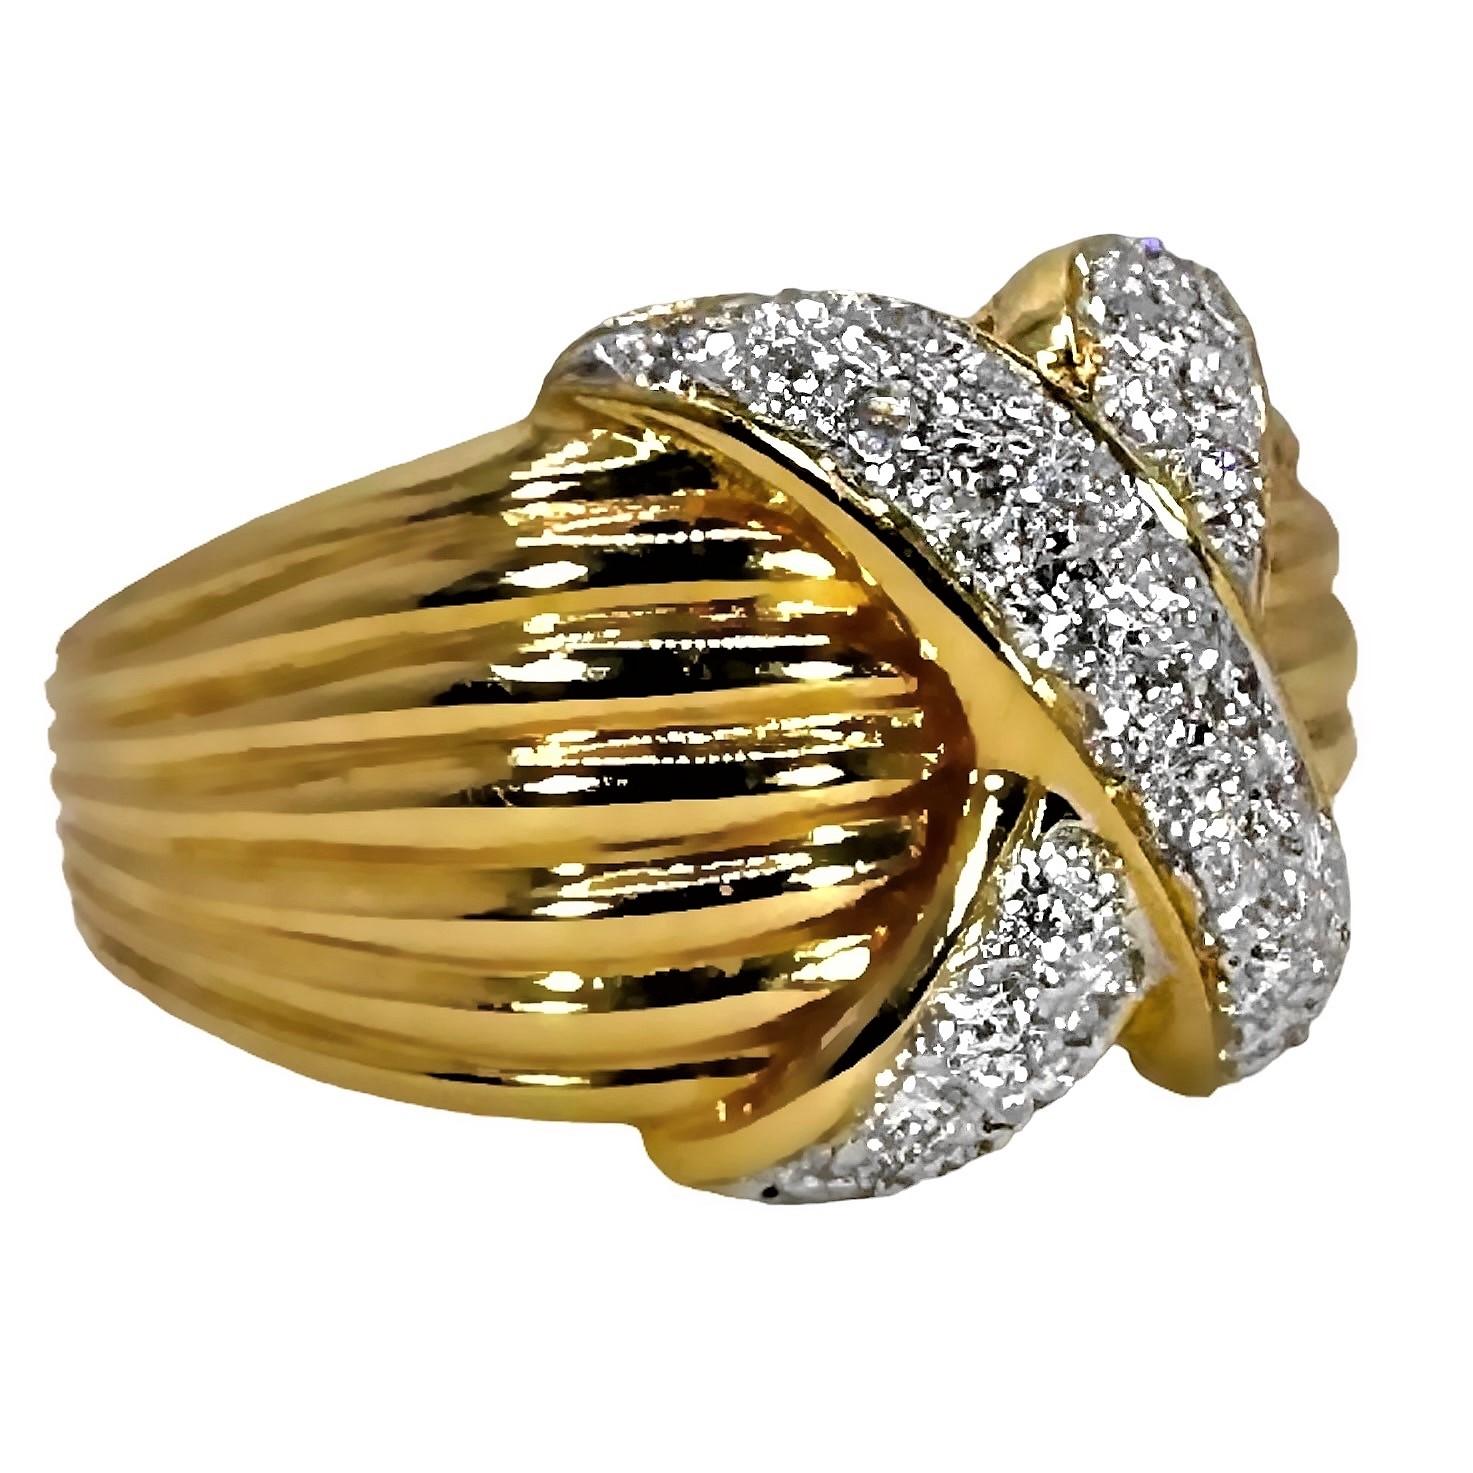 A stylized 18K yellow gold ring, with an 